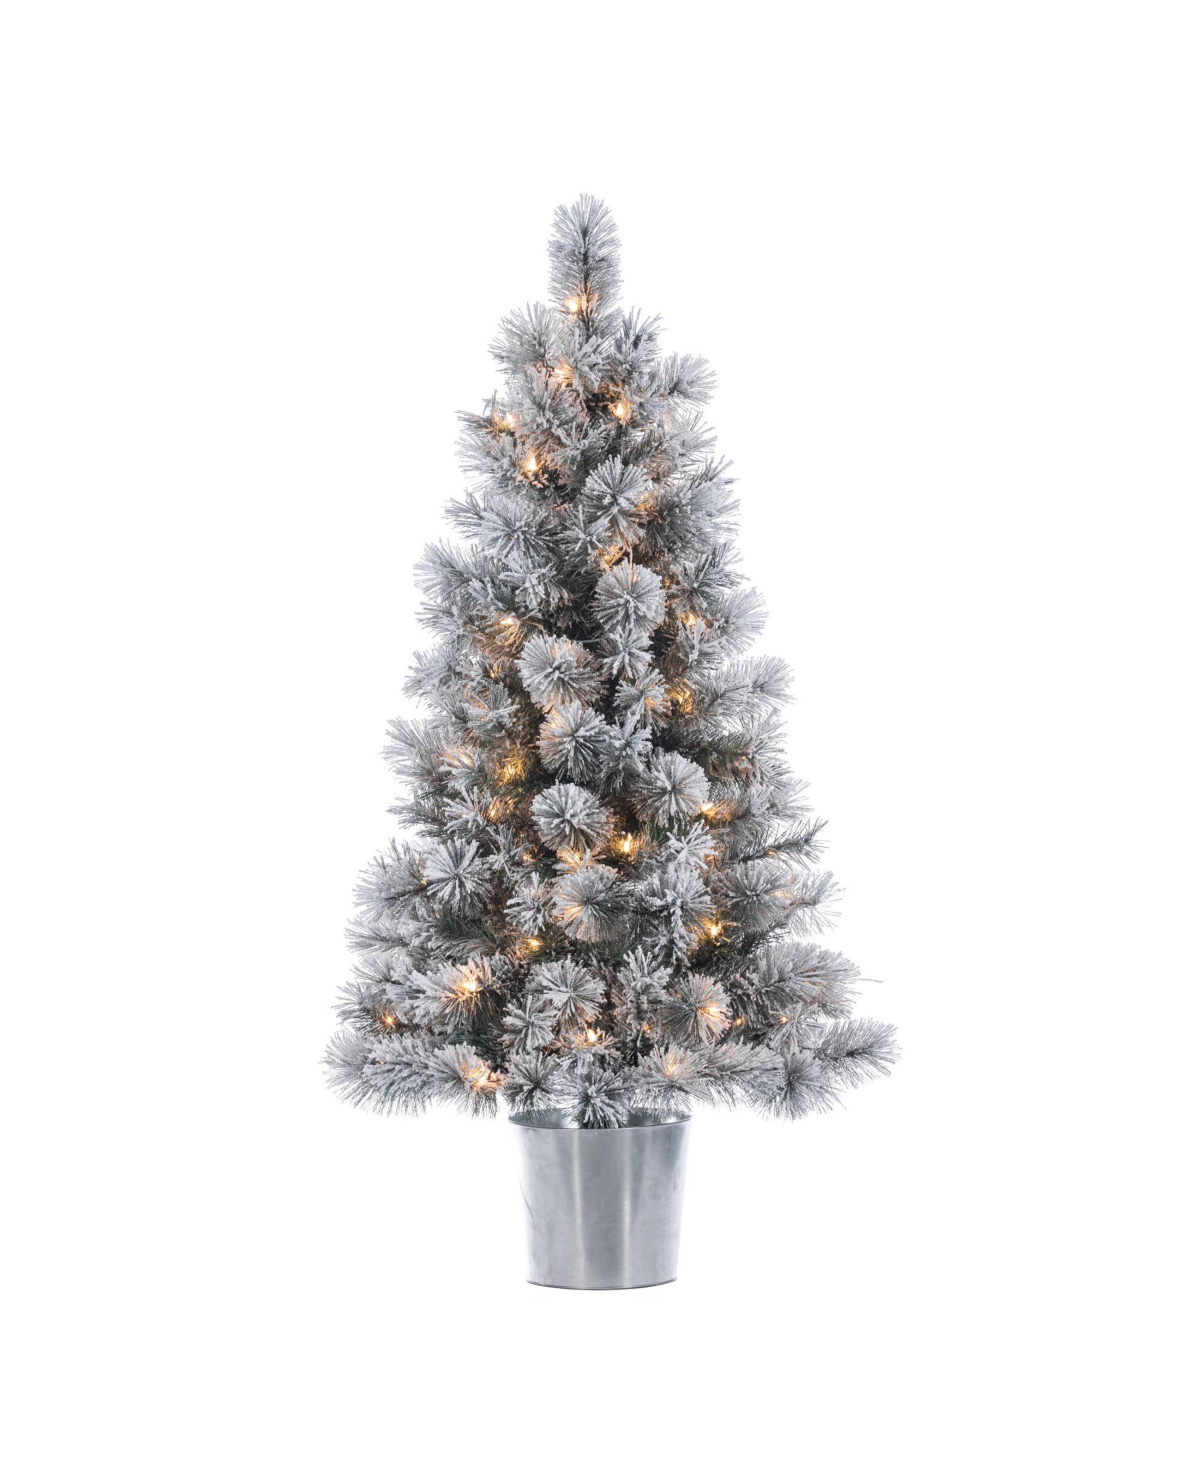 4.5-Foot High Flocked Pre-lit Mixed Needle Boise Pine in Silver Bucket - Multicolor